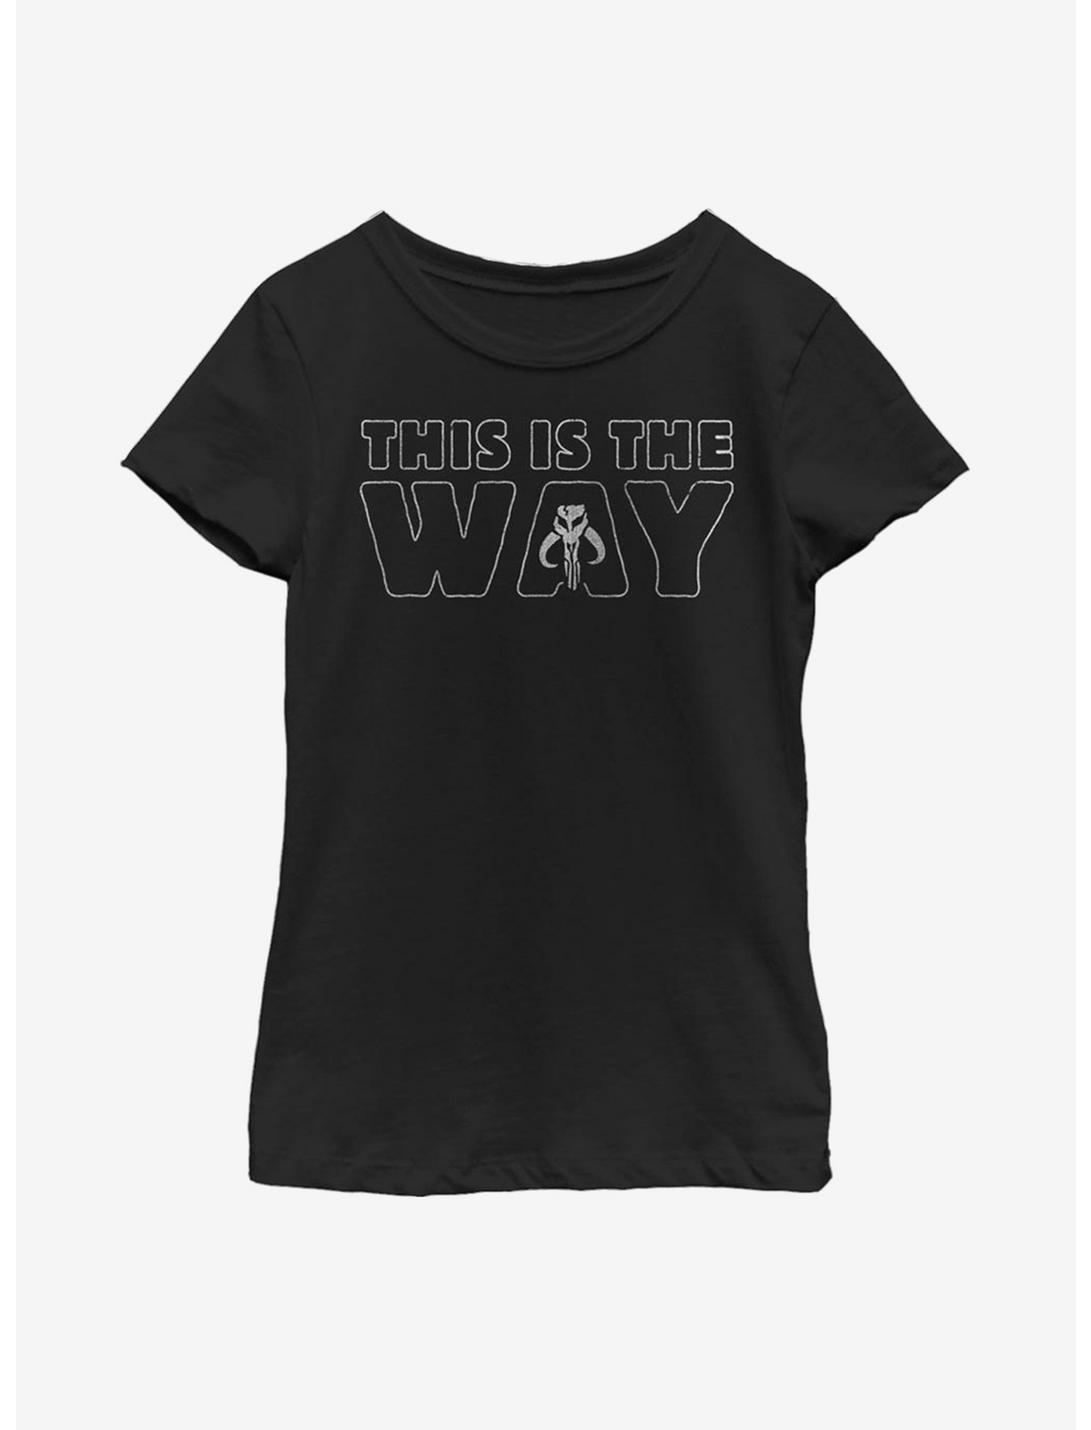 Star Wars The Mandalorian This Is The Way Outline Youth Girls T-Shirt, BLACK, hi-res